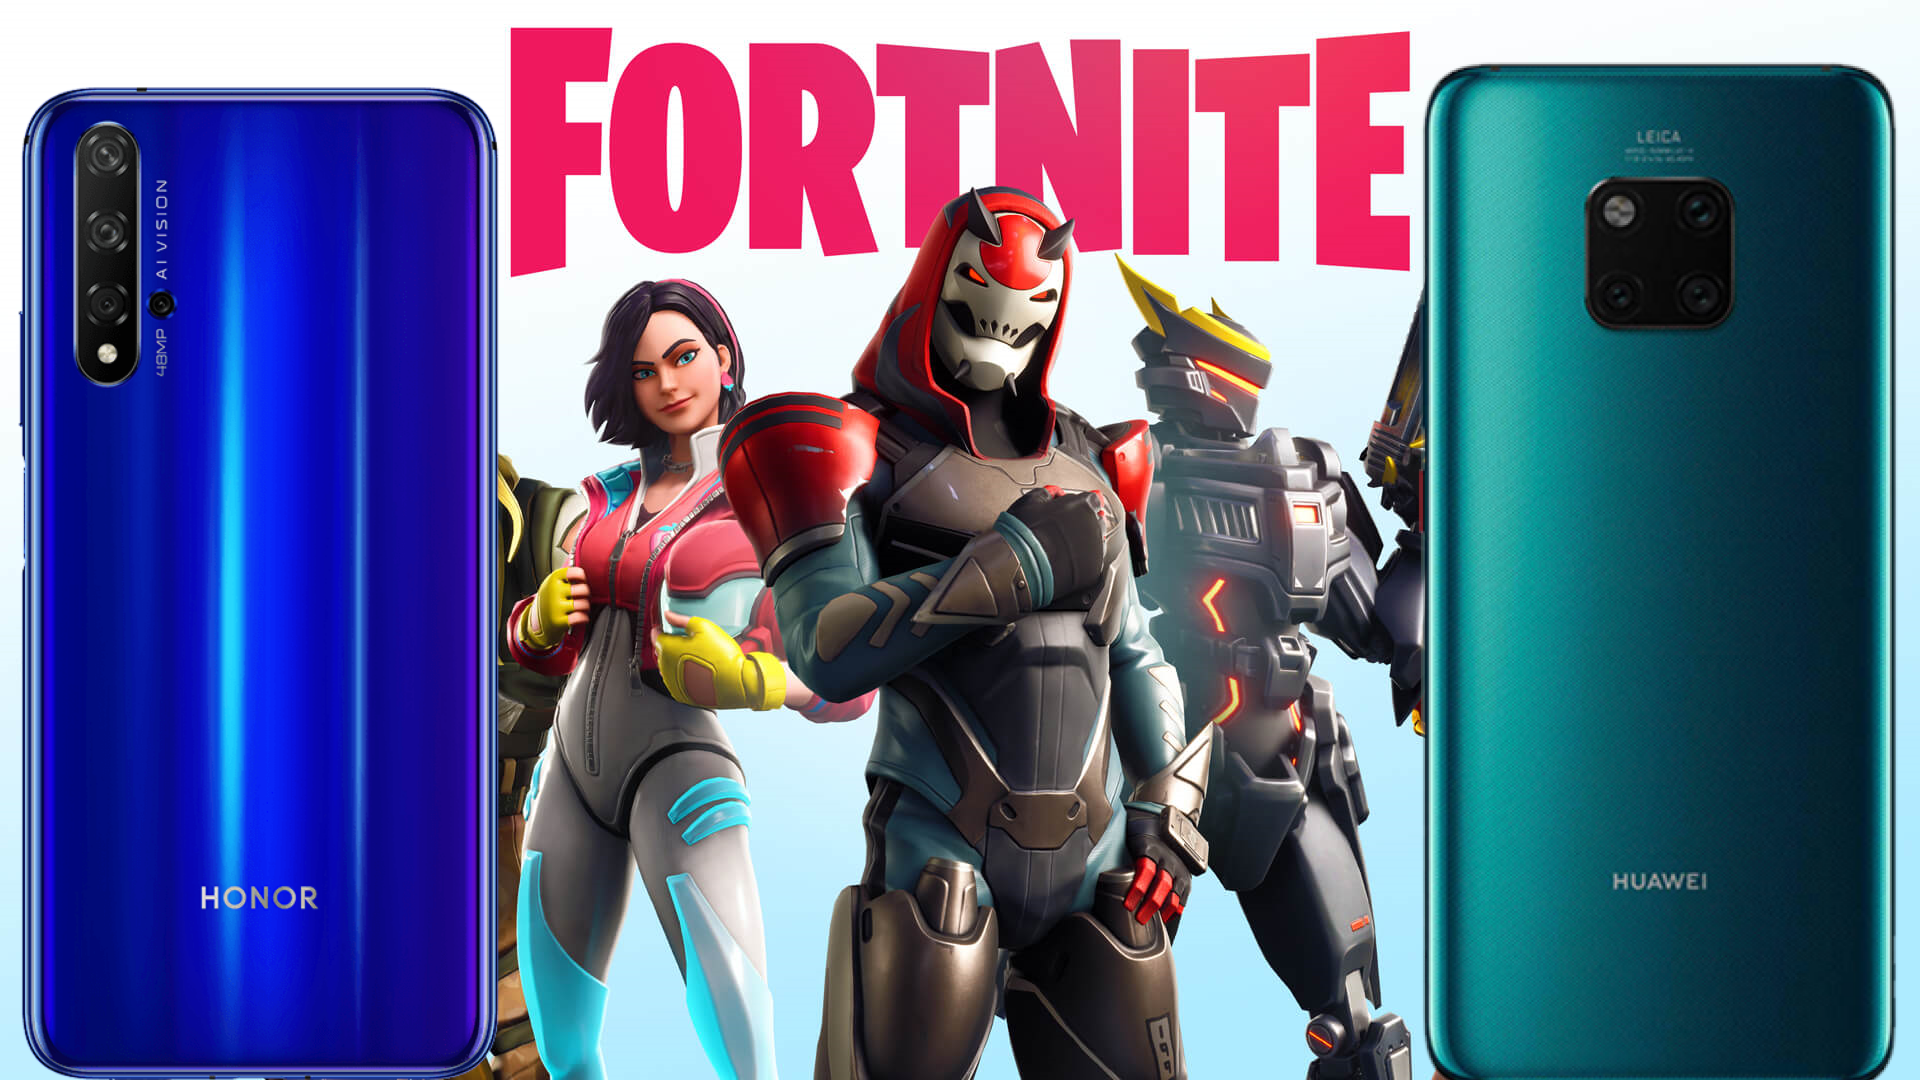 Can The Honor 7x Play Fortnite Moviles Honor Y Huawei Compatibles Con Fortnite